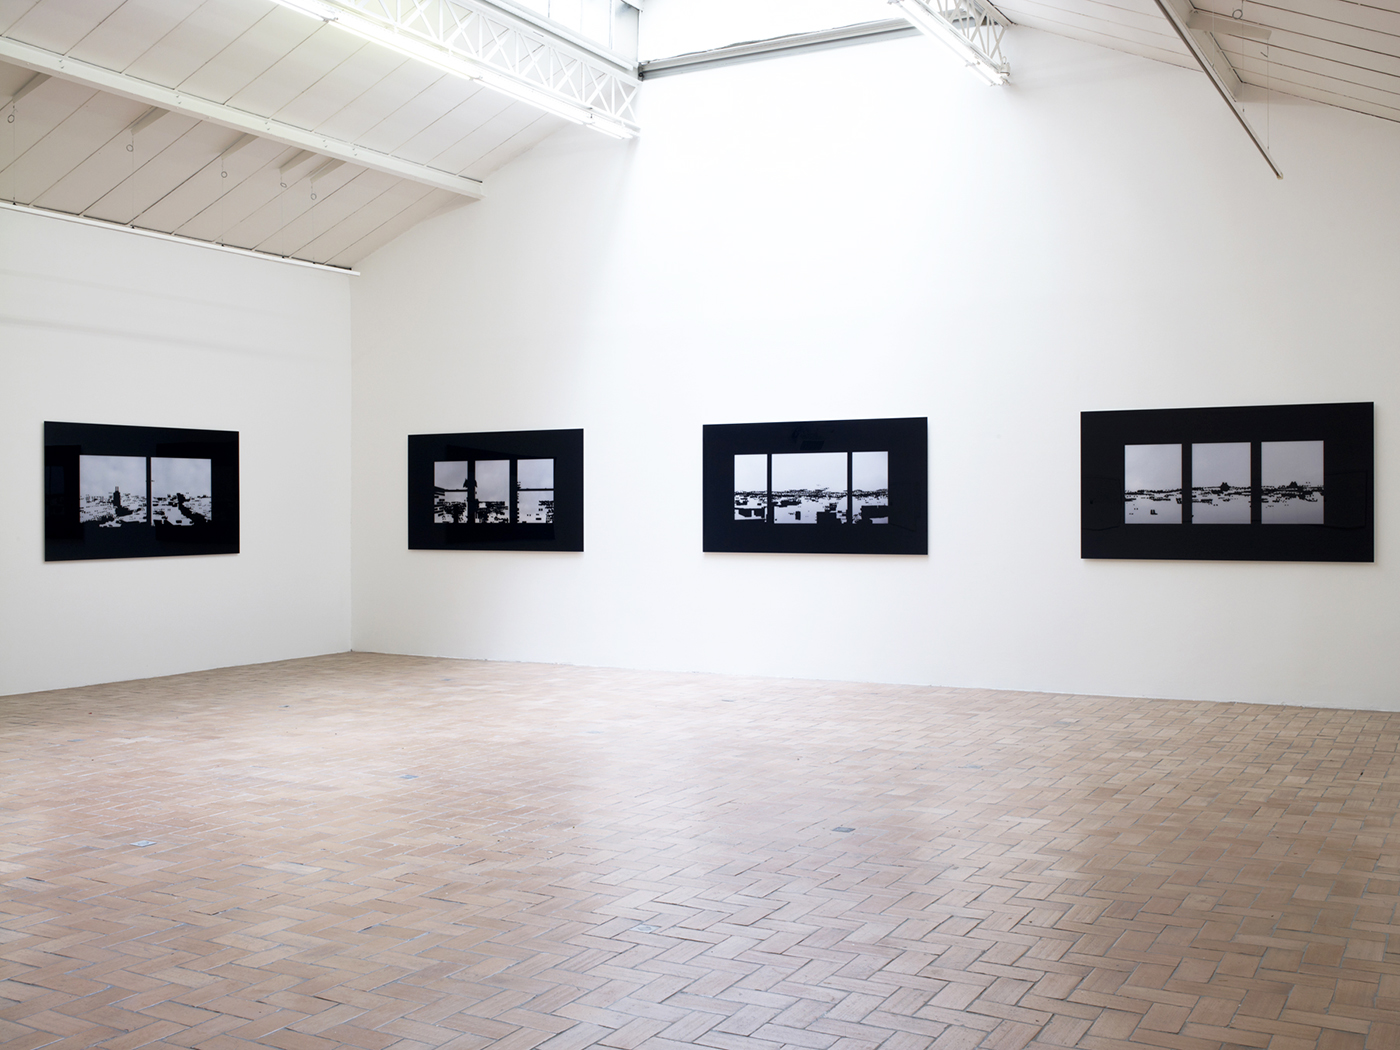 Exhibition view - I was There, Galerie in situ - Fabienne Leclerc, Paris, 2012